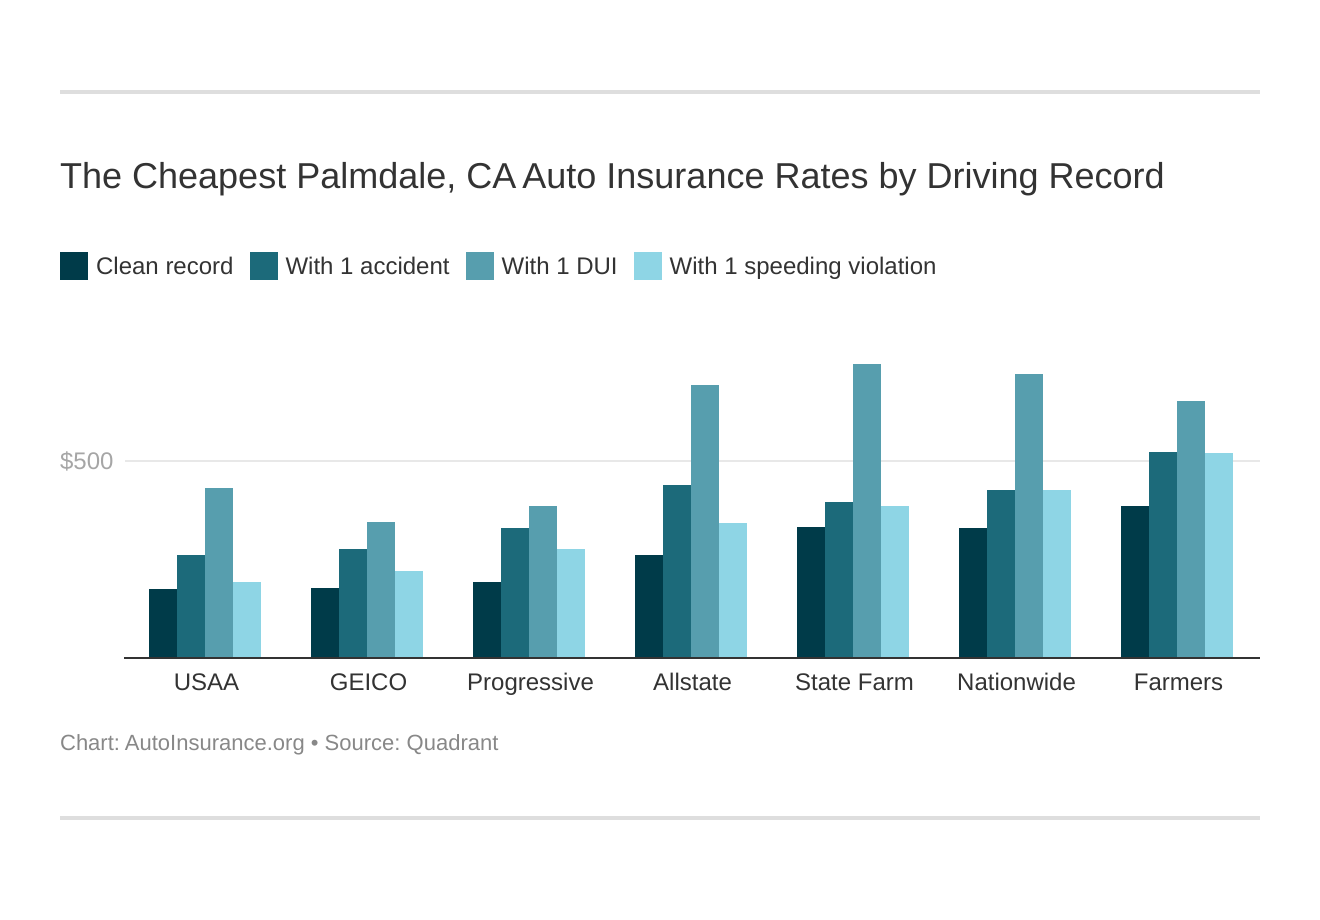 The Cheapest Palmdale, CA Auto Insurance Rates by Driving Record